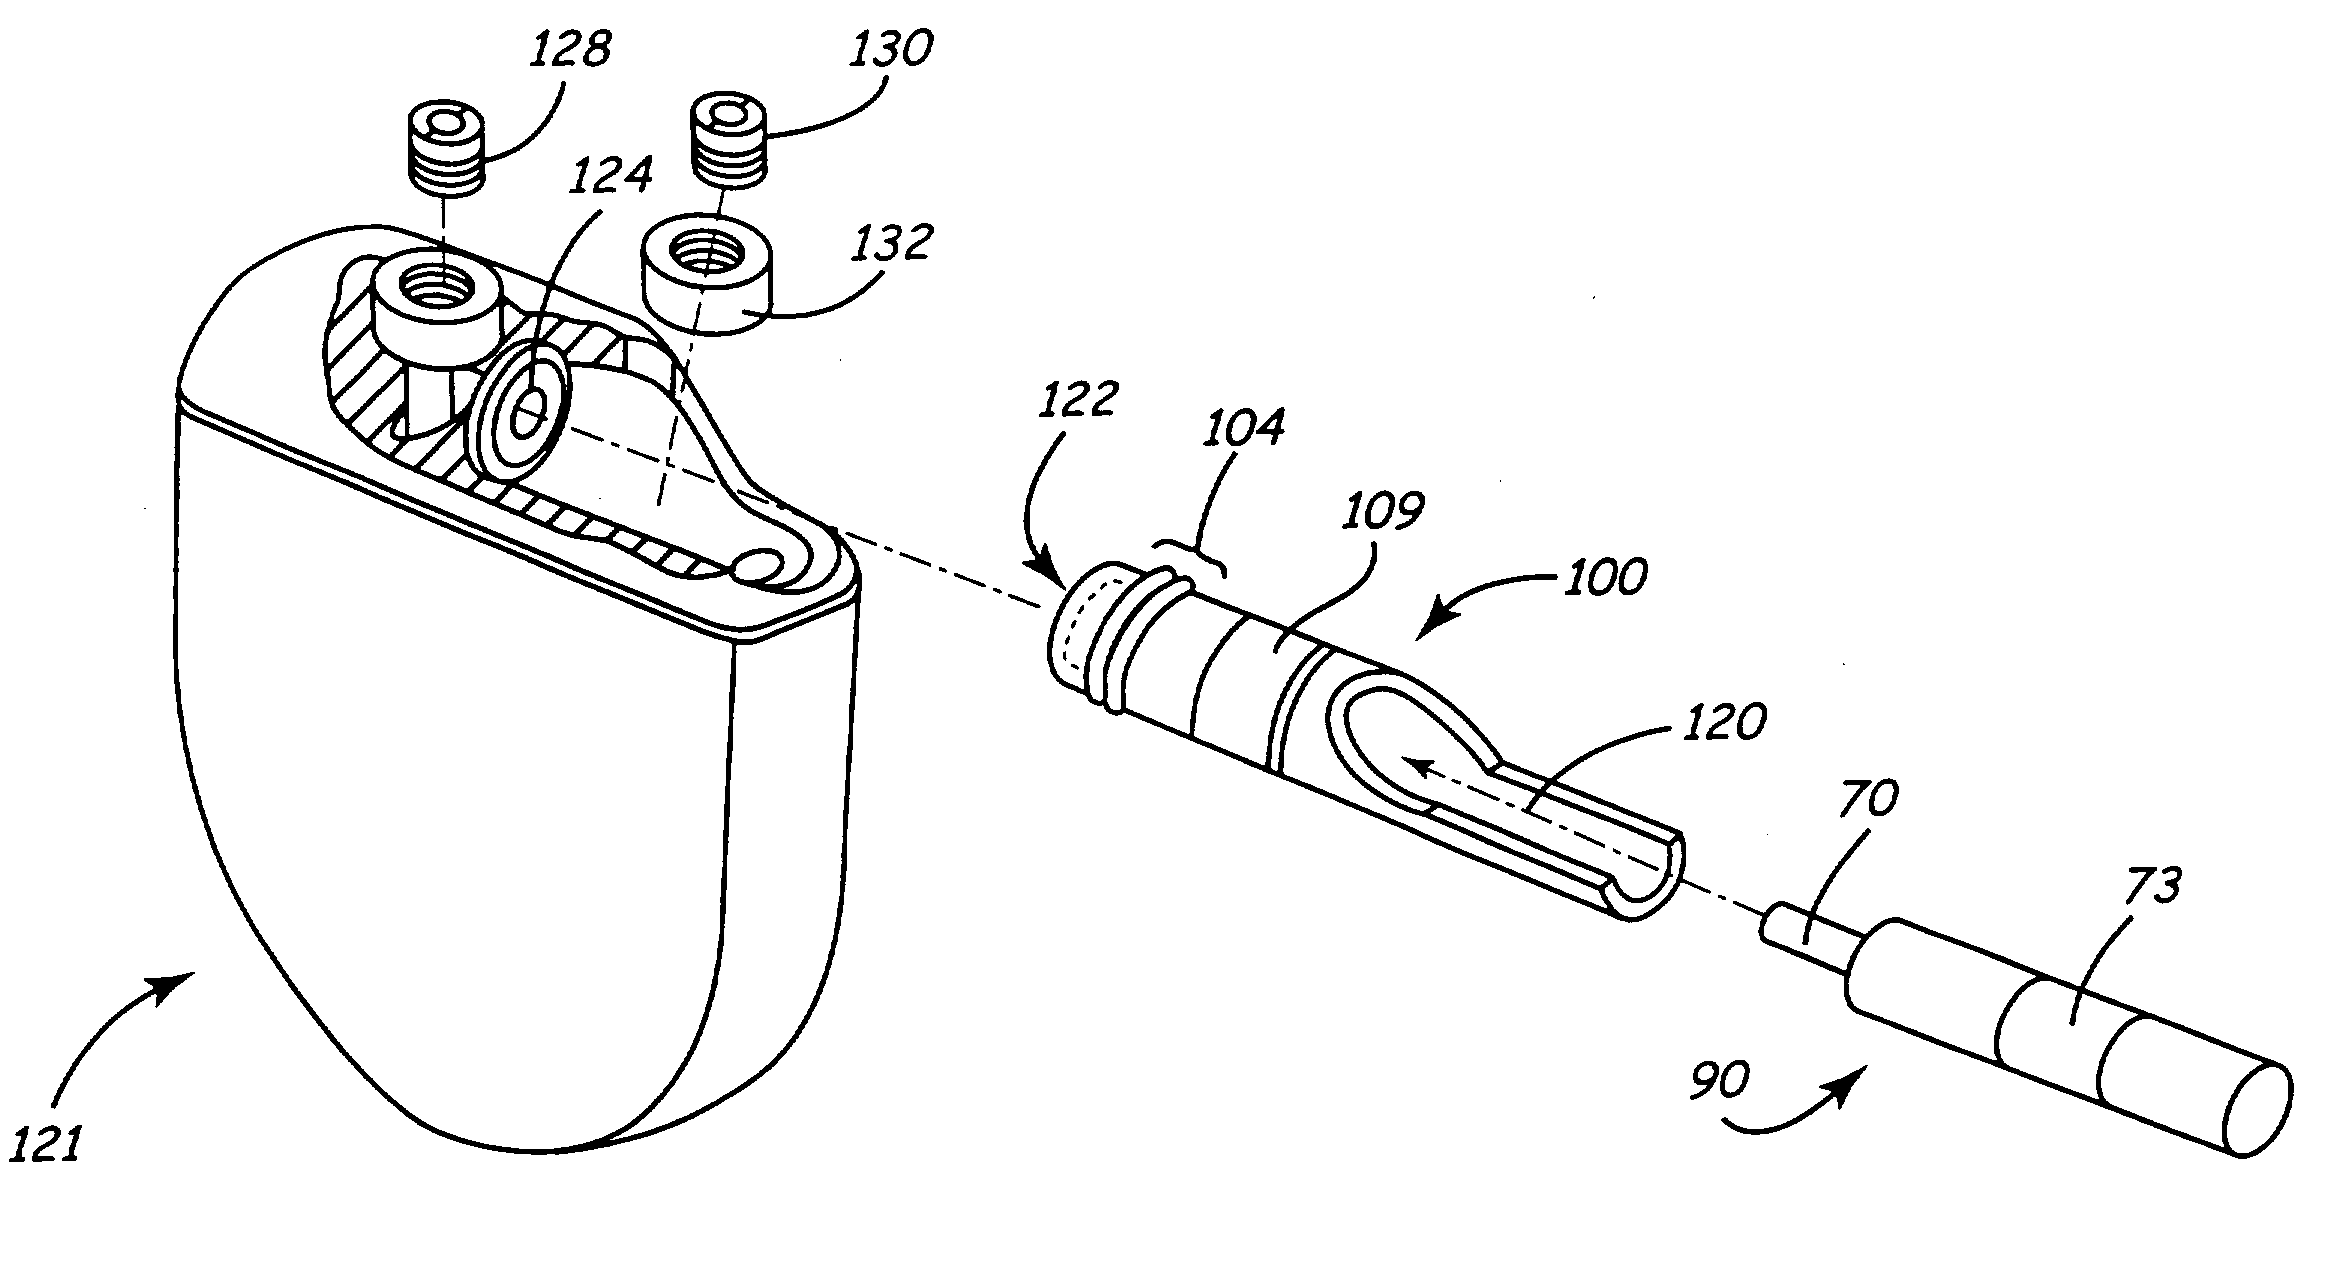 Medical lead and lead connector system